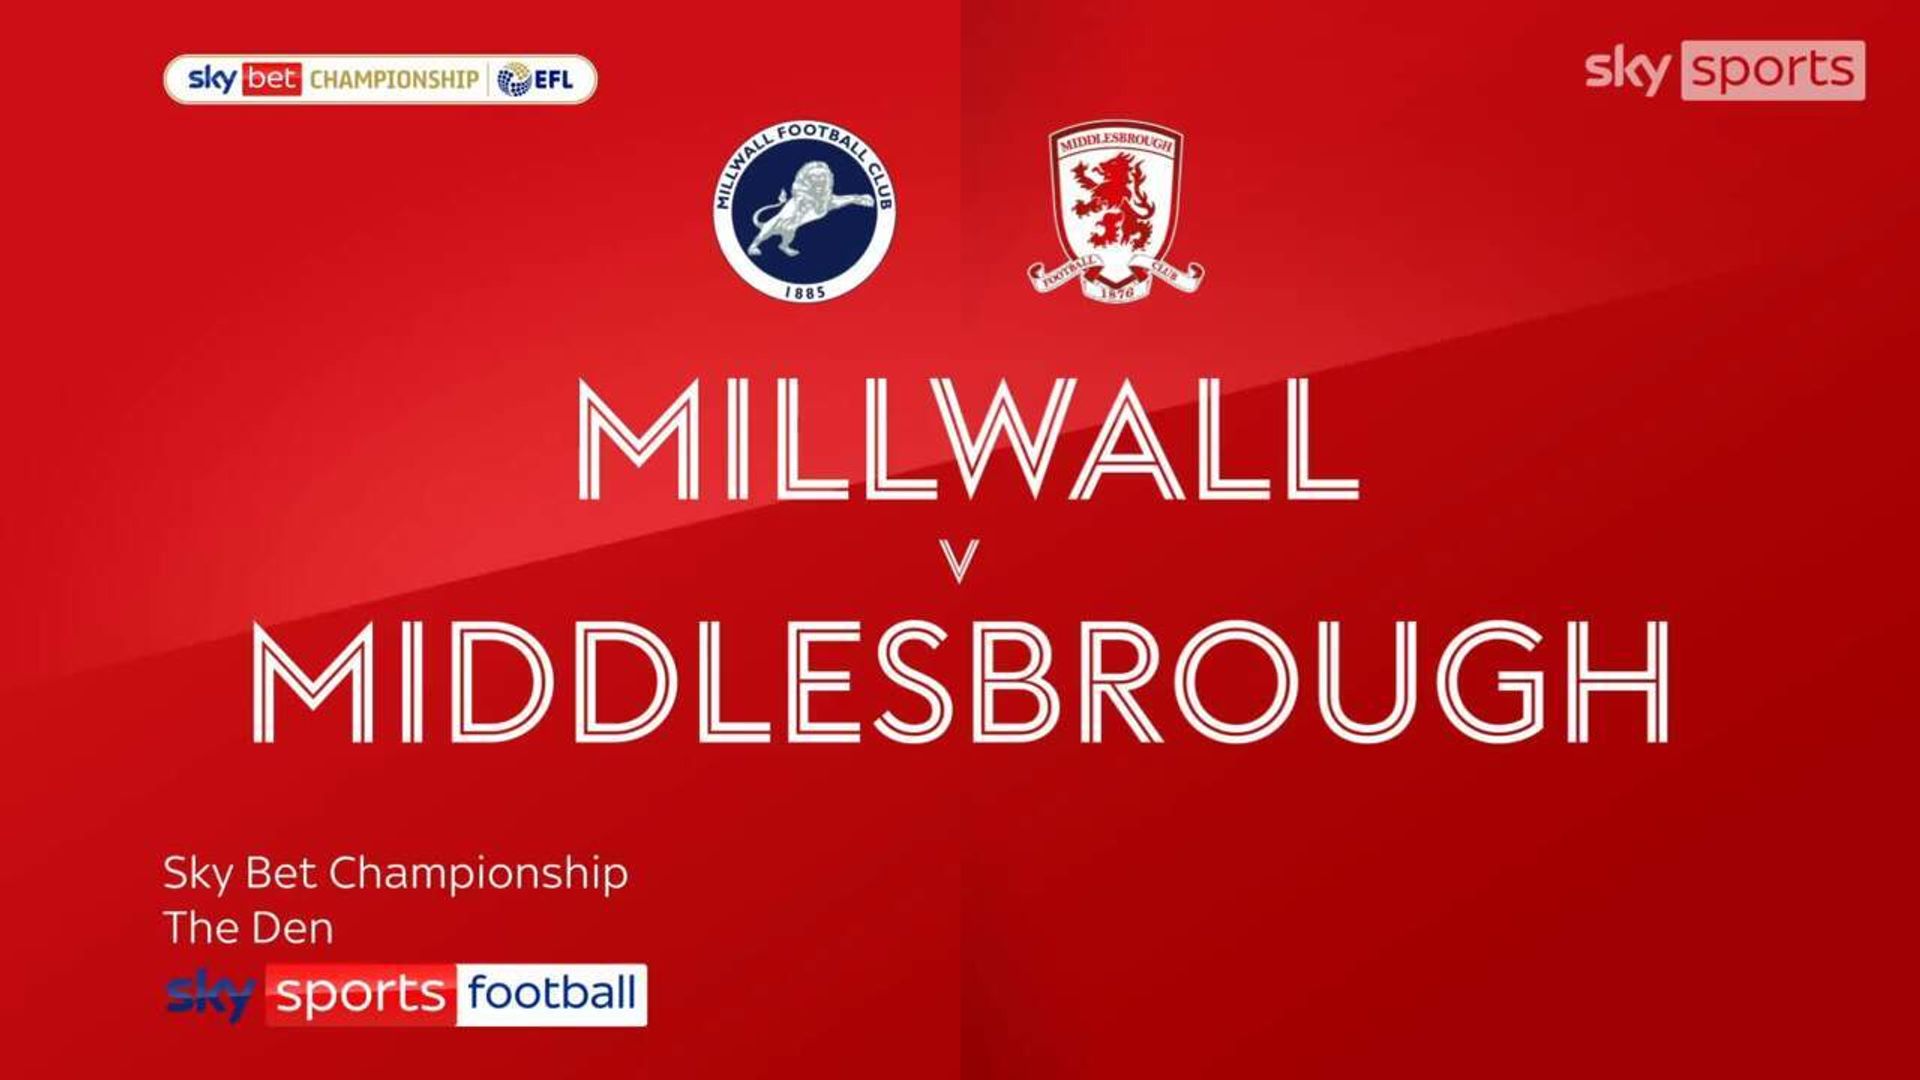 Millwall 1-3 Middlesbrough